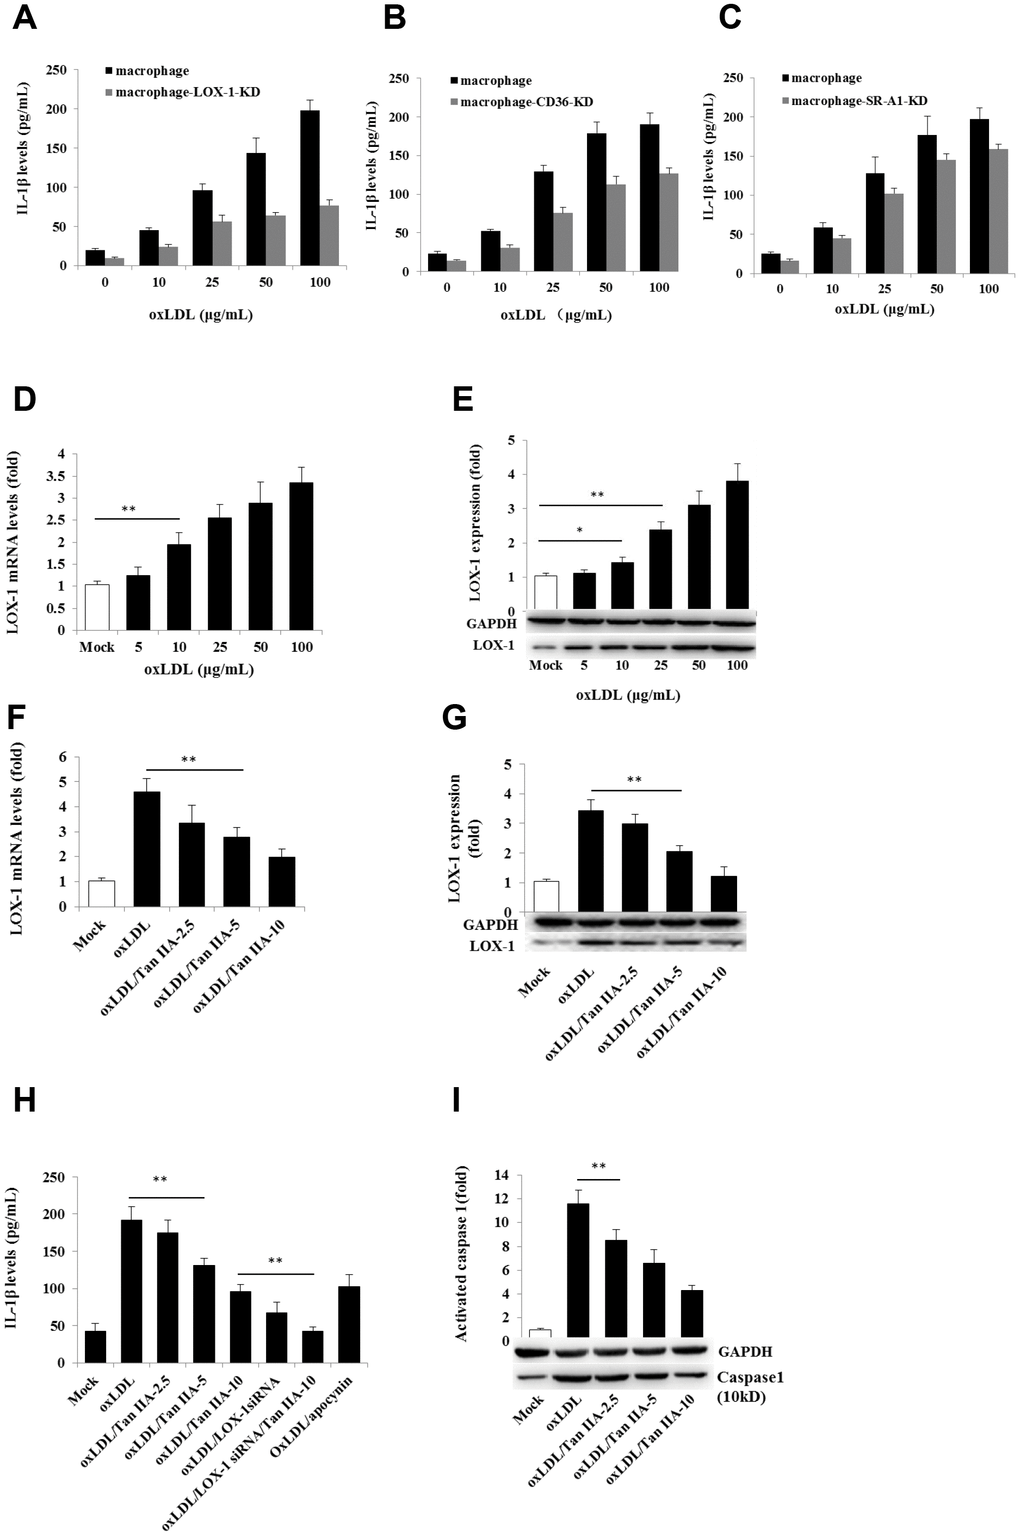 Effects of the LOX-1, CD36 and SR-A1 siRNAs on oxLDL-induced IL-1β productions and effects of oxLDL and Tan IIA on LOX-1 expression and LOX-1-mediated caspase-1activation/IL-1β release. (A–C) Effects of lentivirus-mediated LOX-1, CD36 and SR-A1 siRNAs (MOI = 30) on oxLDL-induced IL-1β productions in mouse macrophages measured by ELISA. (D, E) Effects of oxLDL on LOX-1 expression in macrophages measured by qRT-PCR and Western blot, respectively. (F, G) Effects of Tan IIA on oxLDL-induced LOX-1 expression determined by qRT-PCR and Western blot, respectively. (H) Effects of Tan IIA on oxLDL-induced LOX-1-mediated IL-1β expression in macrophages. (I) Effects of Tan IIA on oxLDL-induced LOX-1-mediated caspase-1 activation in macrophages.